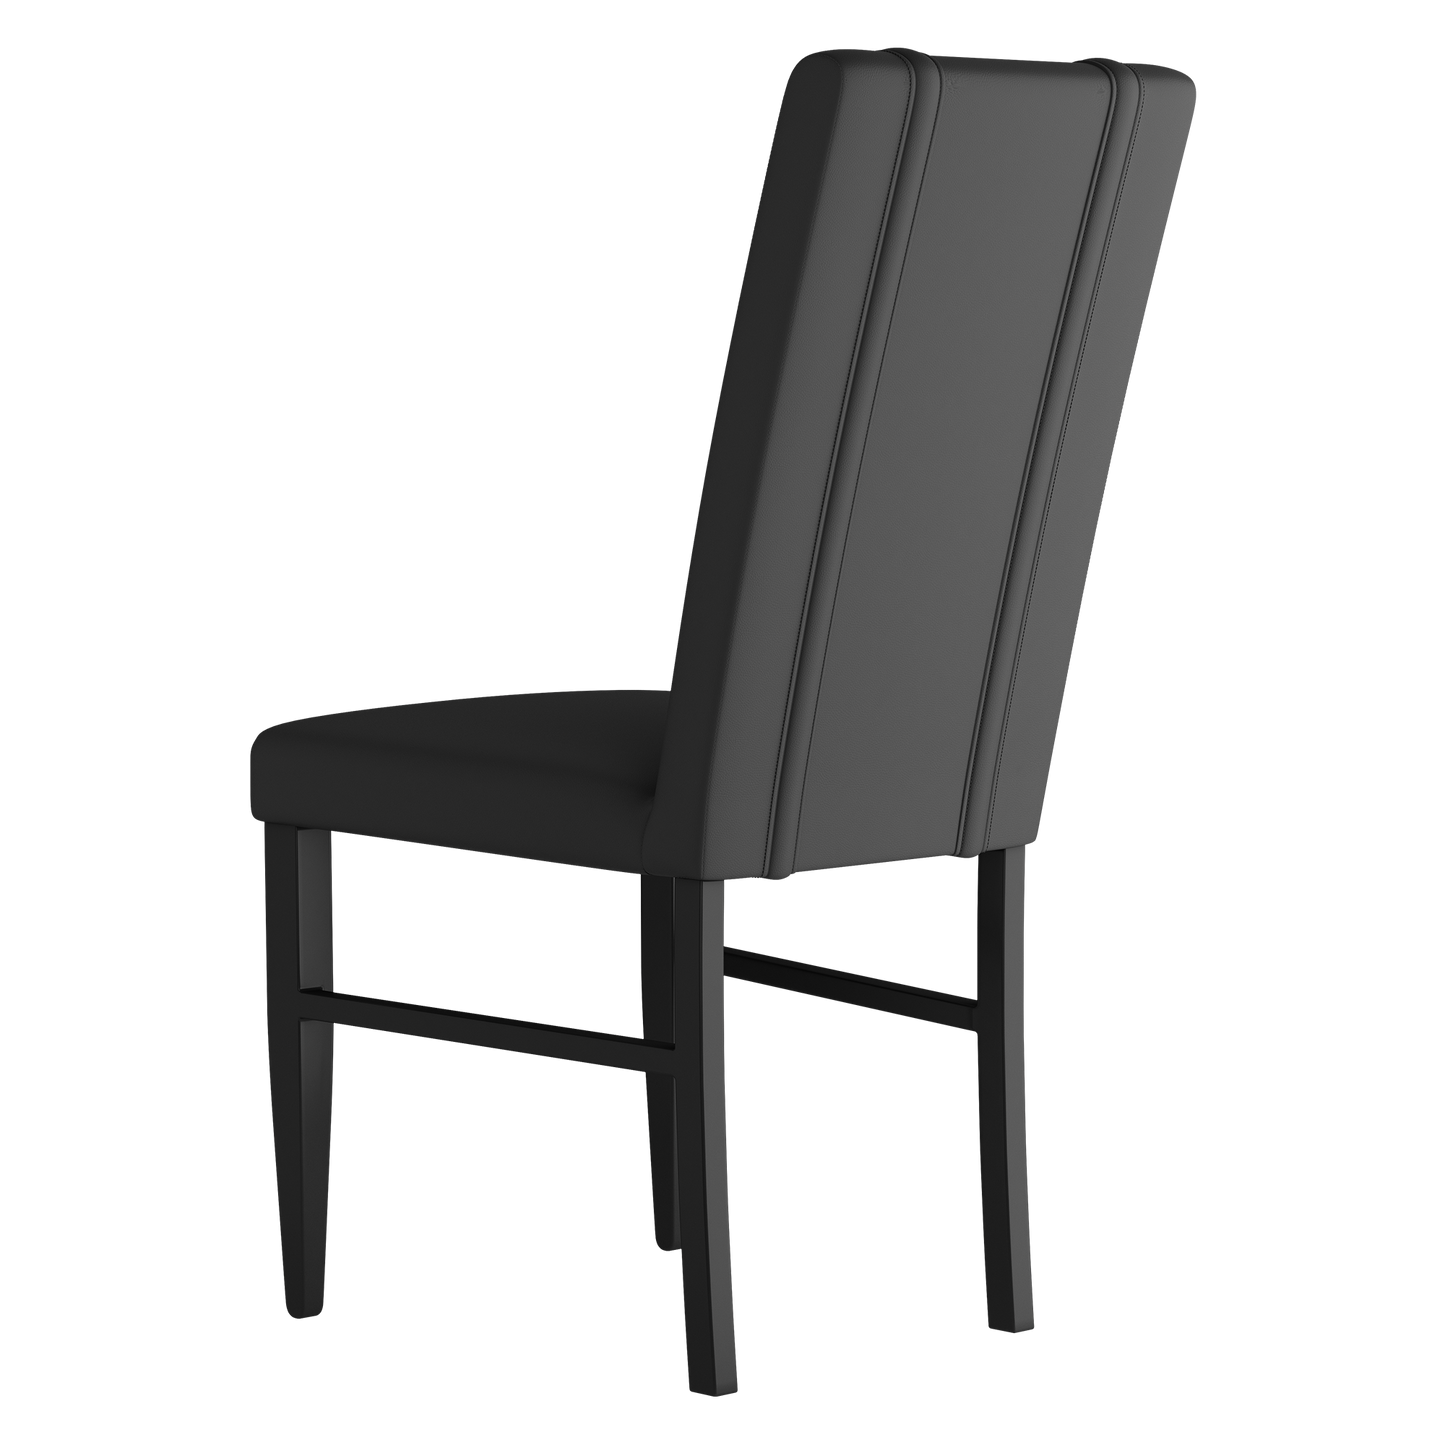 Side Chair 2000 with Oregon State Primary Logo Set of 2